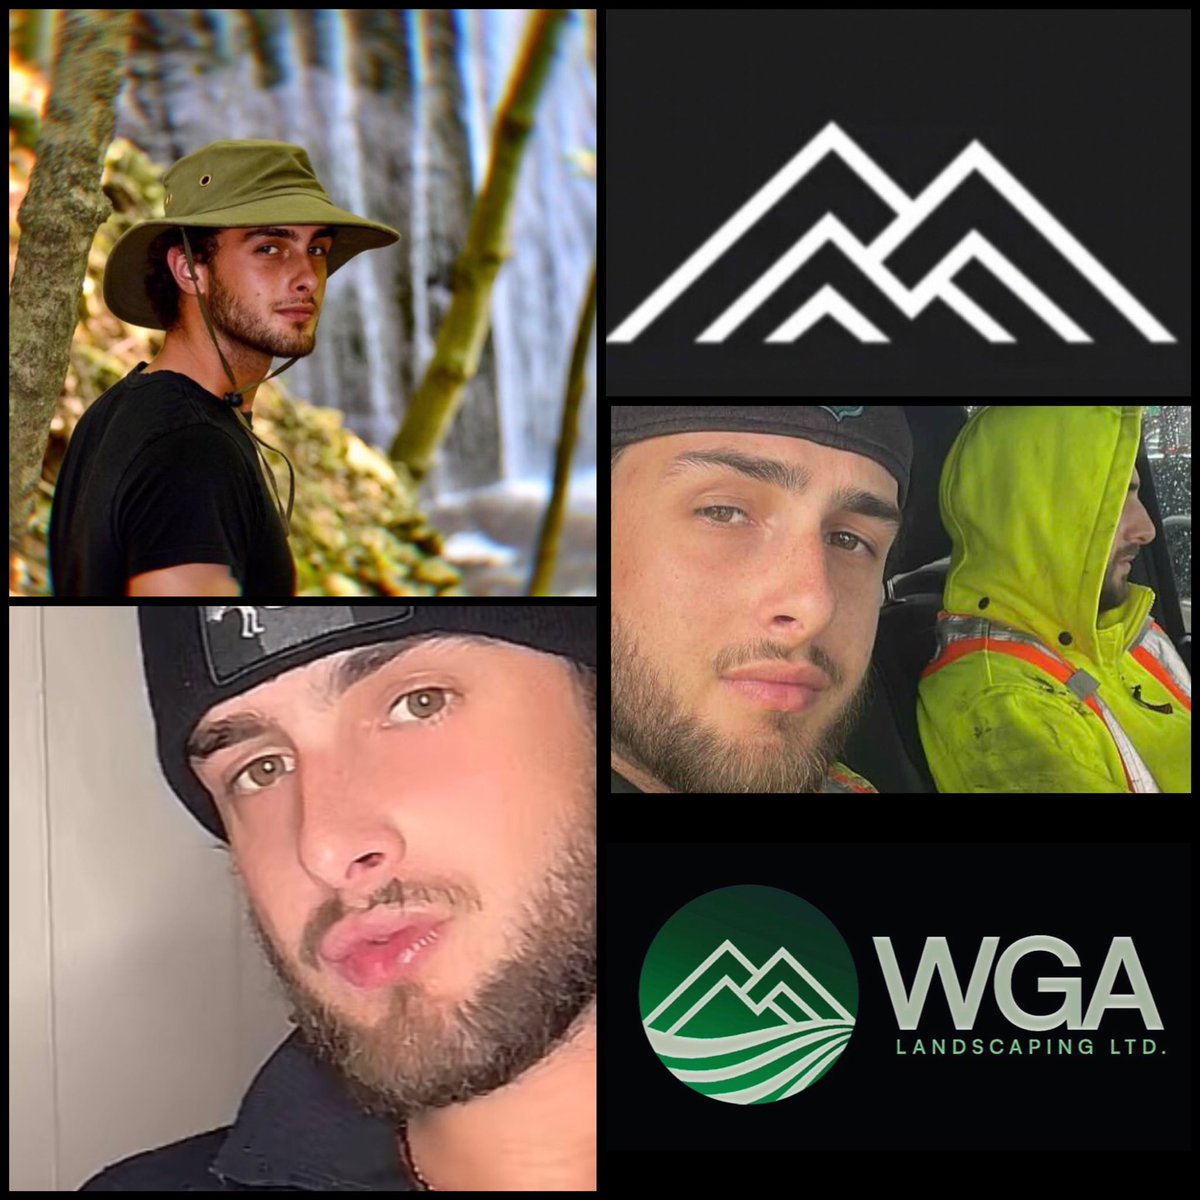 #WGAWednesday
The evolution of WGA. A young man with a dream of travel and adventure discovers a social media outlet that allows him to organically create a community, a brand, and a business that will be there long after the phenomena of SM is gone 💙 #wgatwd
#AJM #WeGoAlong